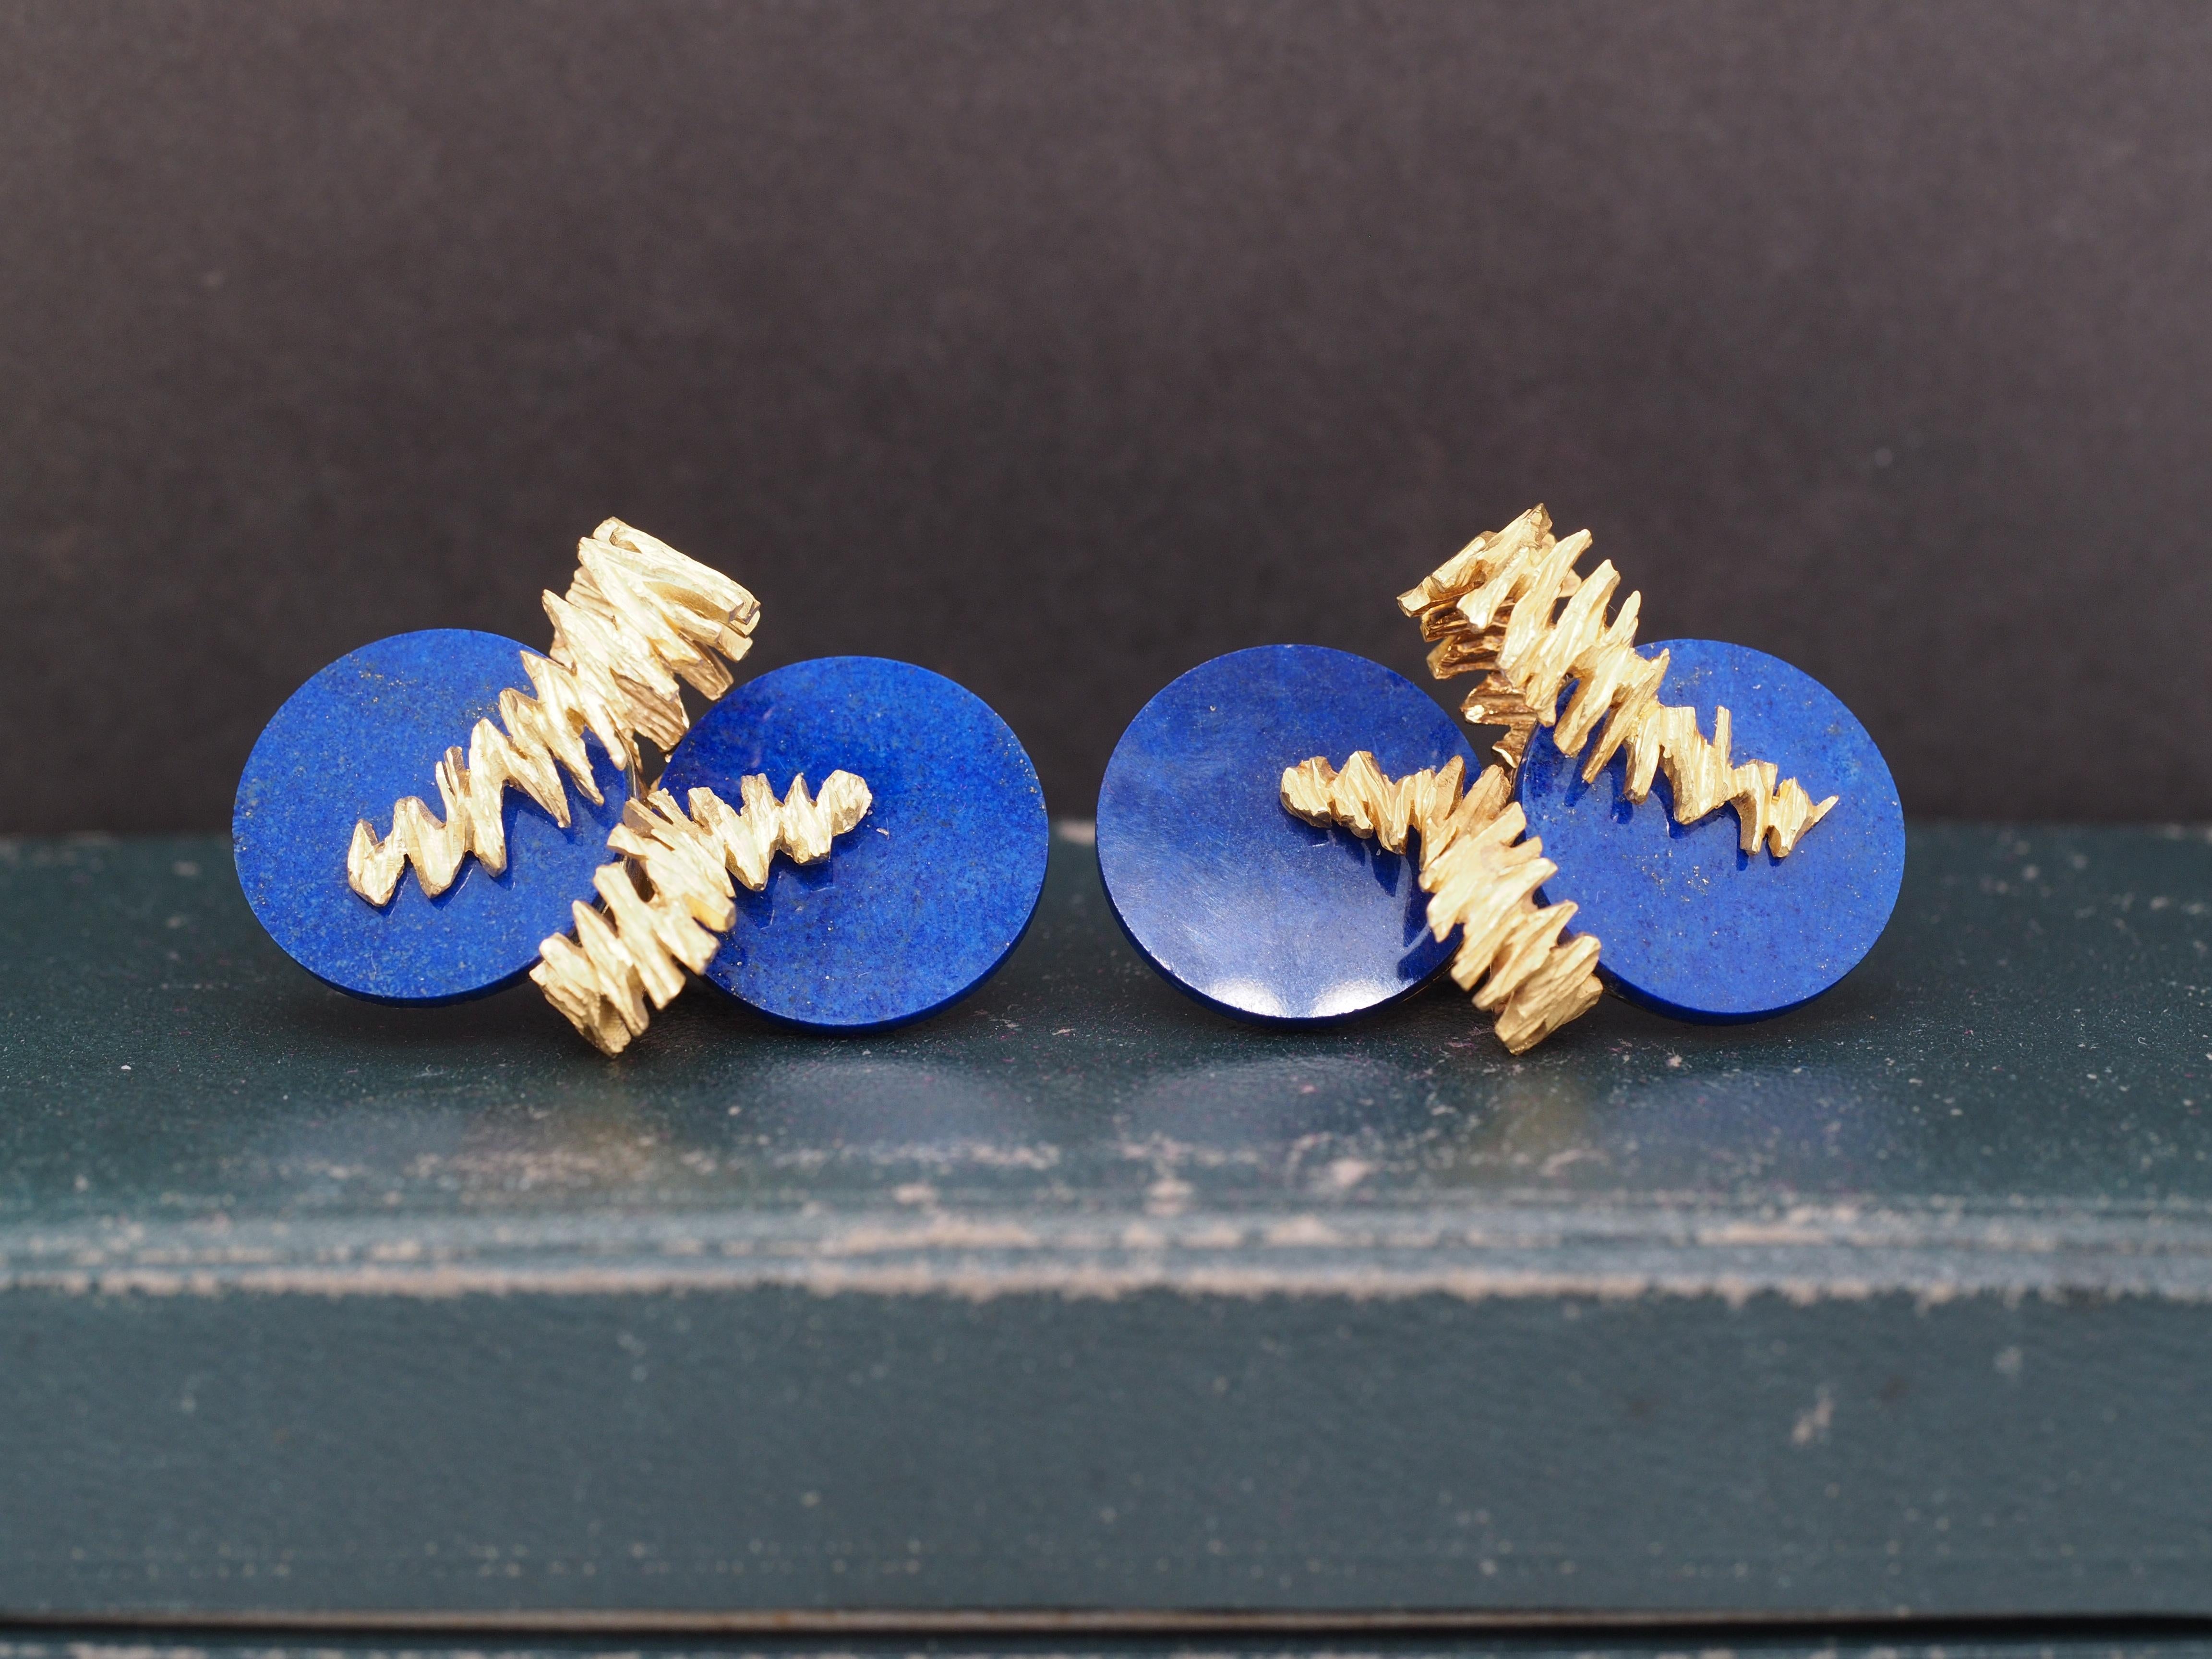 Year: 1970s
Item Details:
Metal Type: 18K Yellow Gold [Hallmarked, and Tested]
Weight: 27.3 grams
A very rare earring set designed by Mellerio-Dits Meller. Has serial number and French hallmarks on the earrings along with signature.
Measurements: